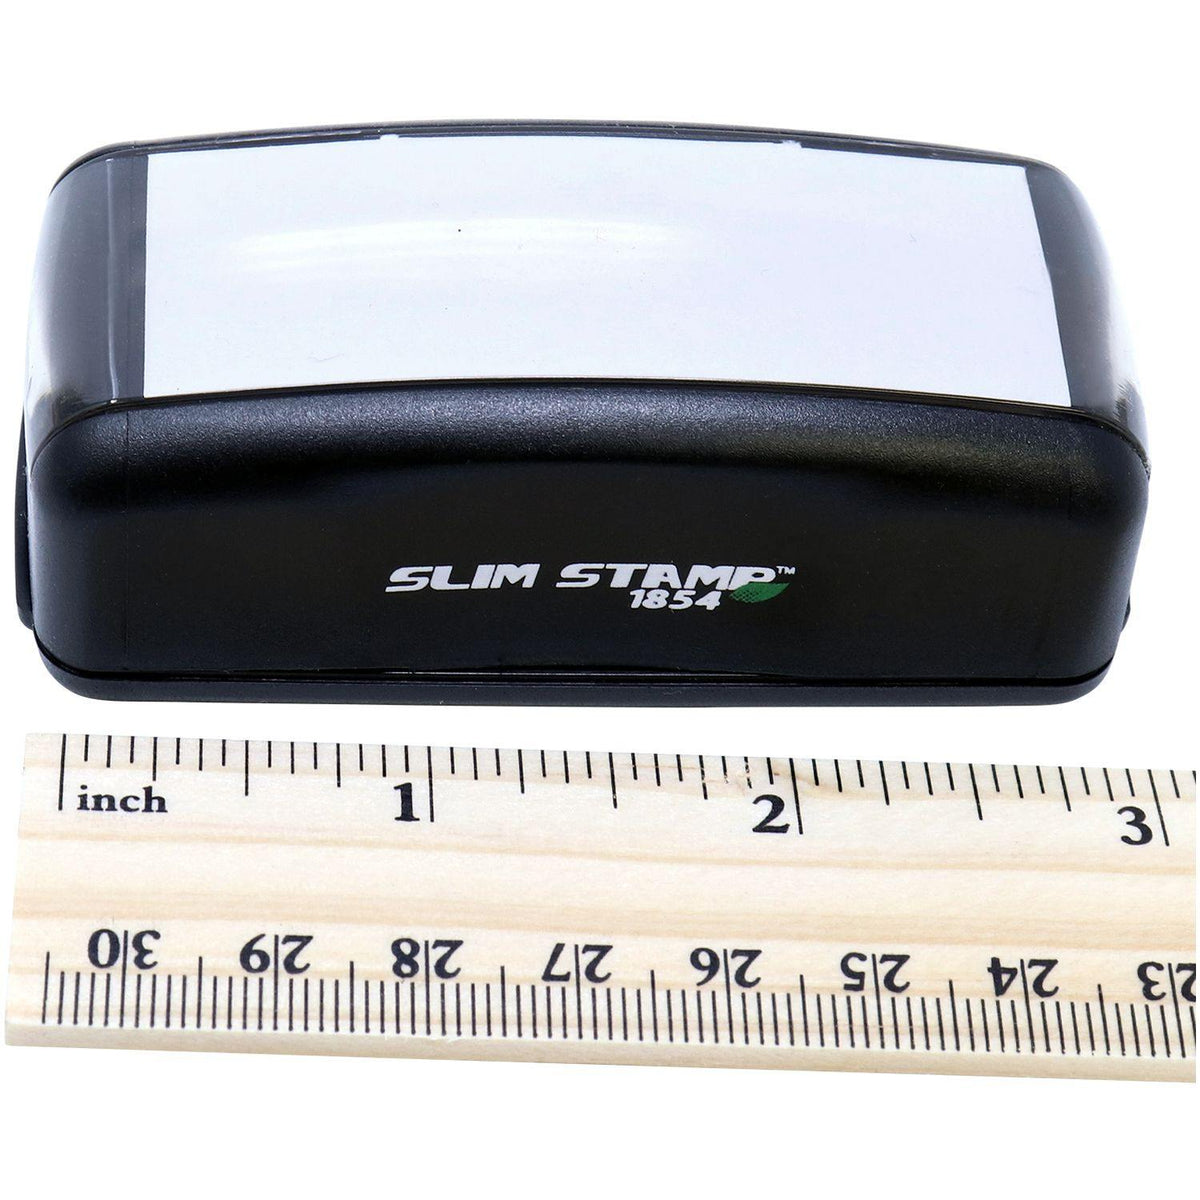 Measurement Large Pre-Inked Restricted Delivery Stamp with Ruler